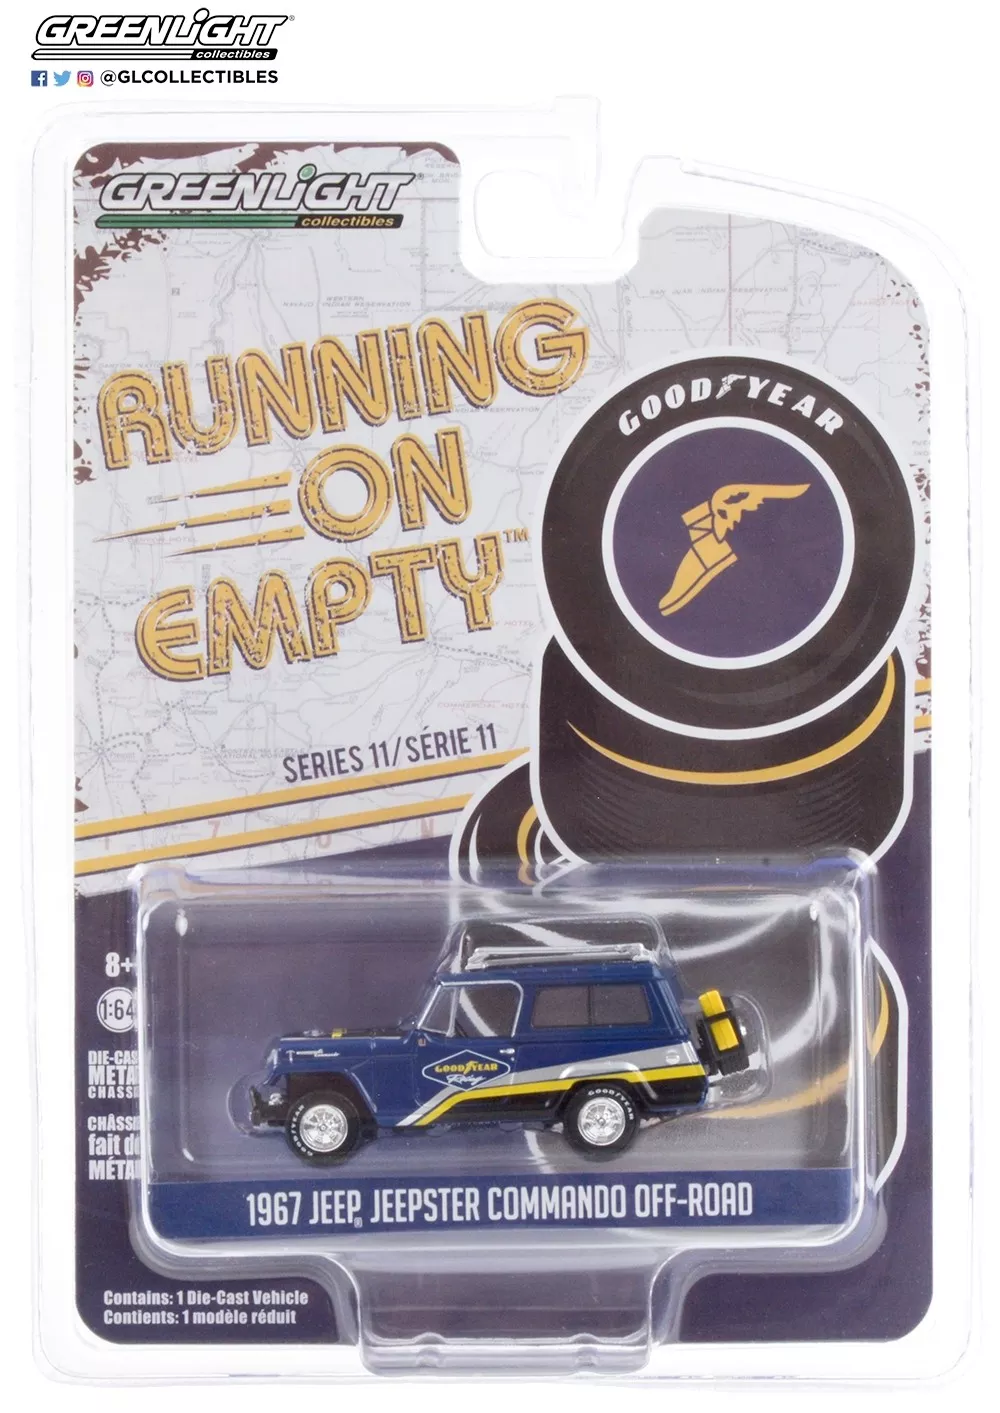 Greenlight - 1967 Jeep Jeepster Commando Off-Road - Goodyear Racing